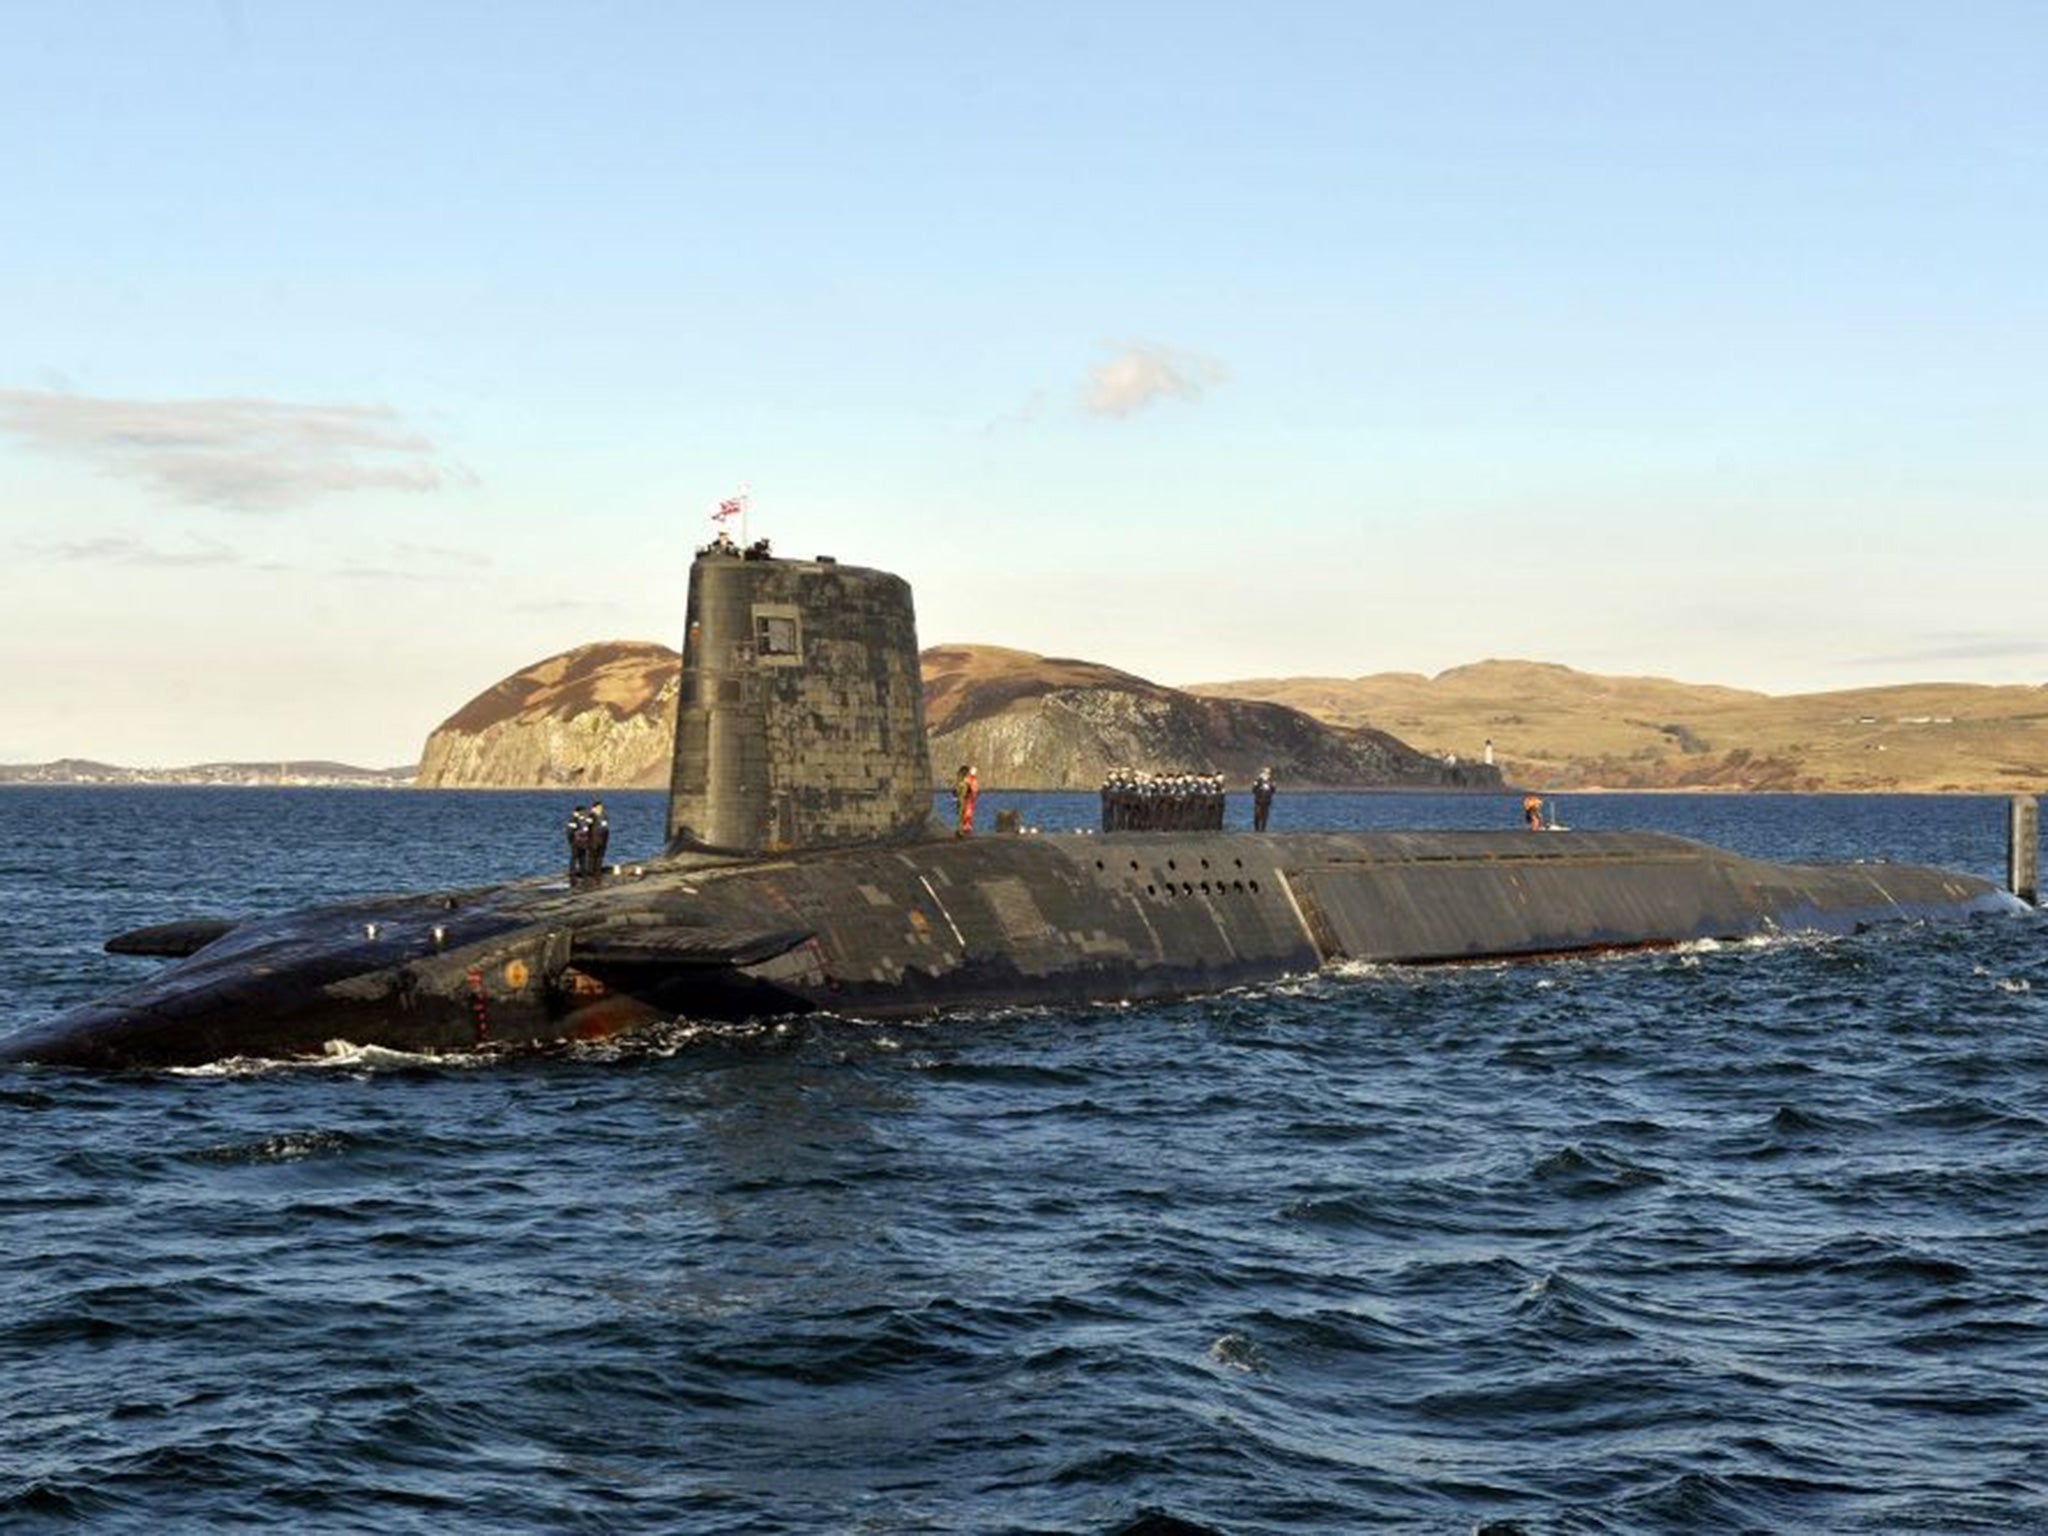 Trident nuclear submarine HMS Victorious patrolling off the coast of Scotland.